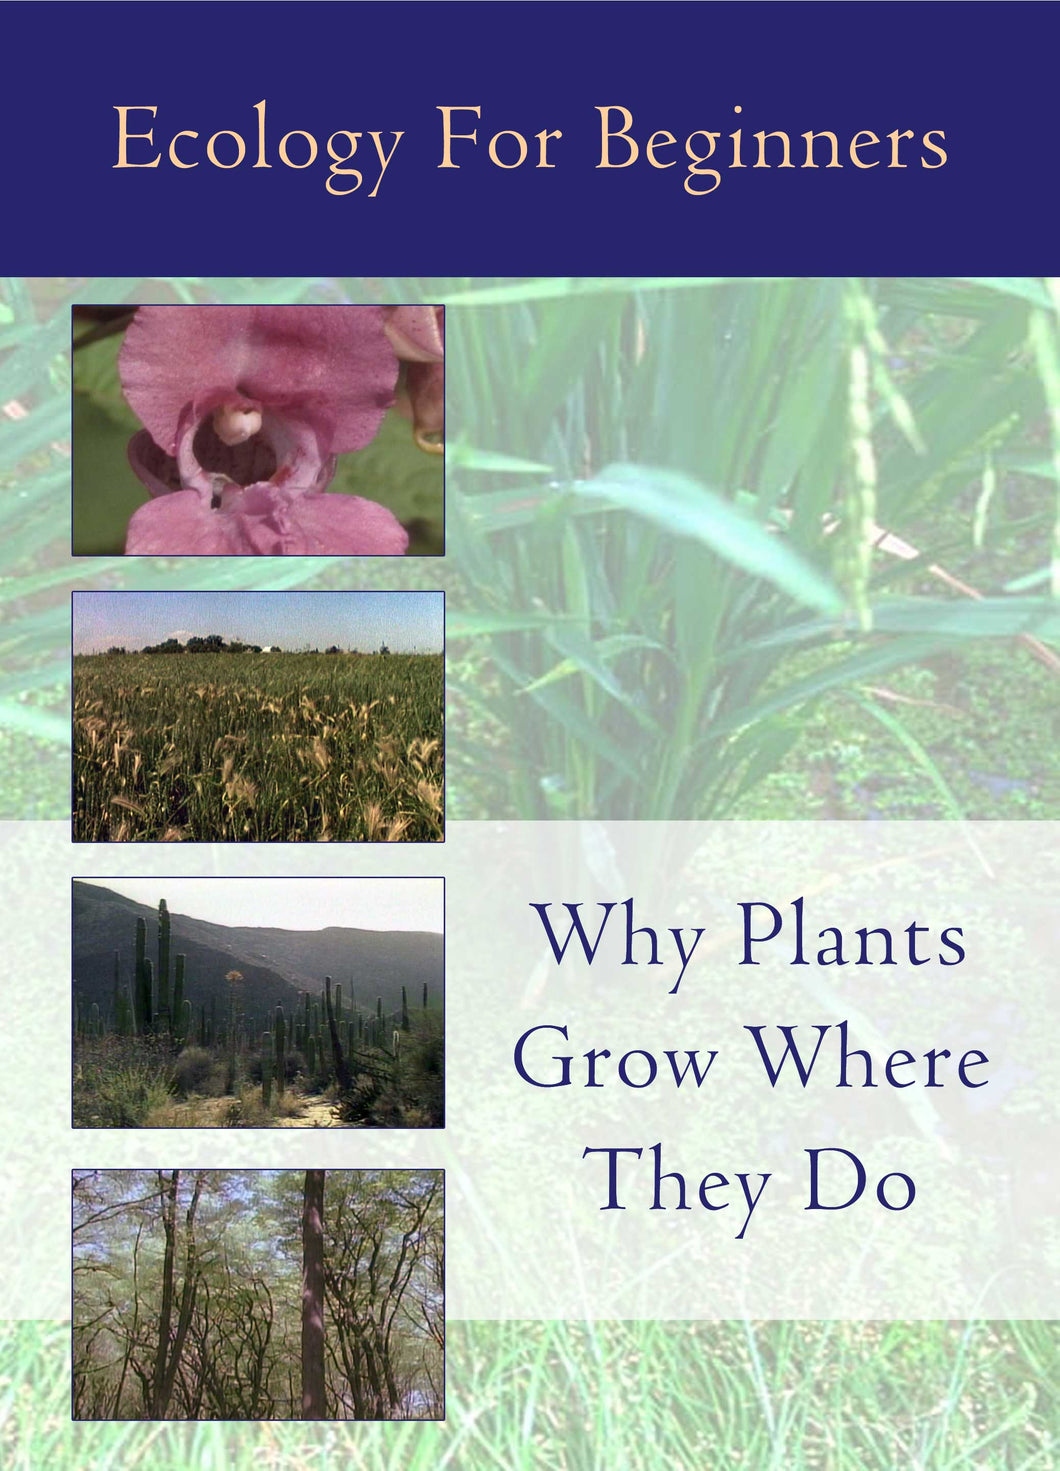 Ecology for Beginners:  Why Plants Grow Where They Do